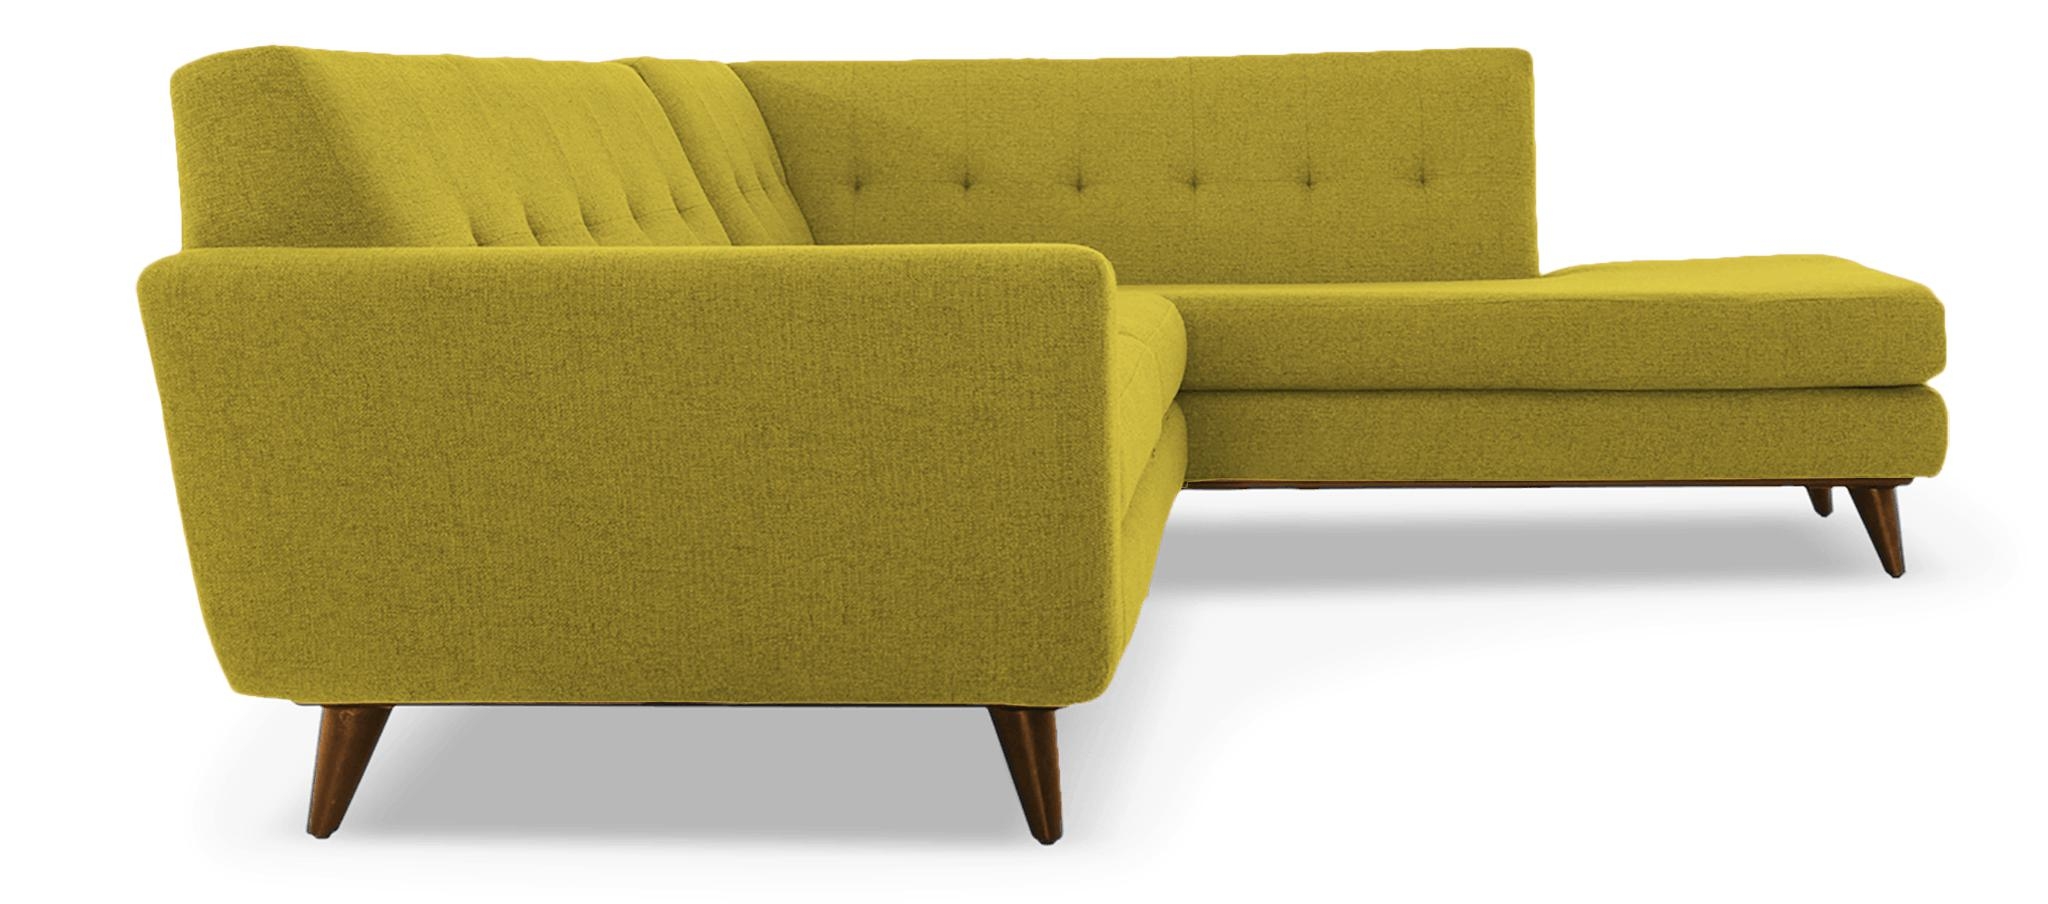 Yellow Hughes Mid Century Modern Sectional with Bumper - Bloke Goldenrod - Mocha - Right  - Image 2